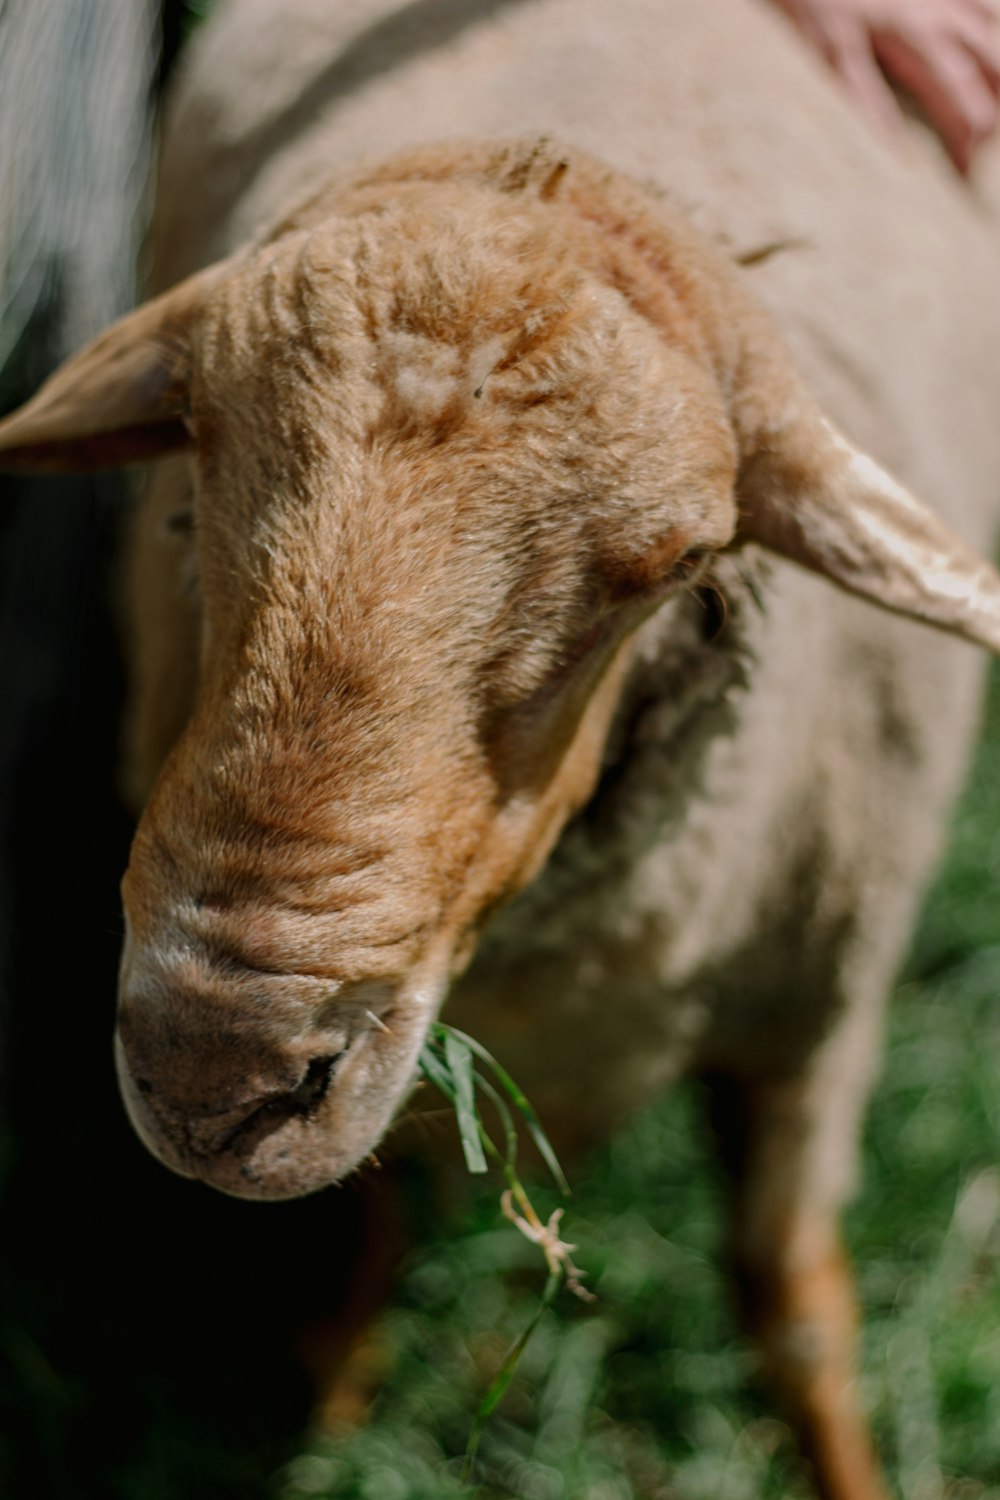 a close up of a sheep with grass in its mouth